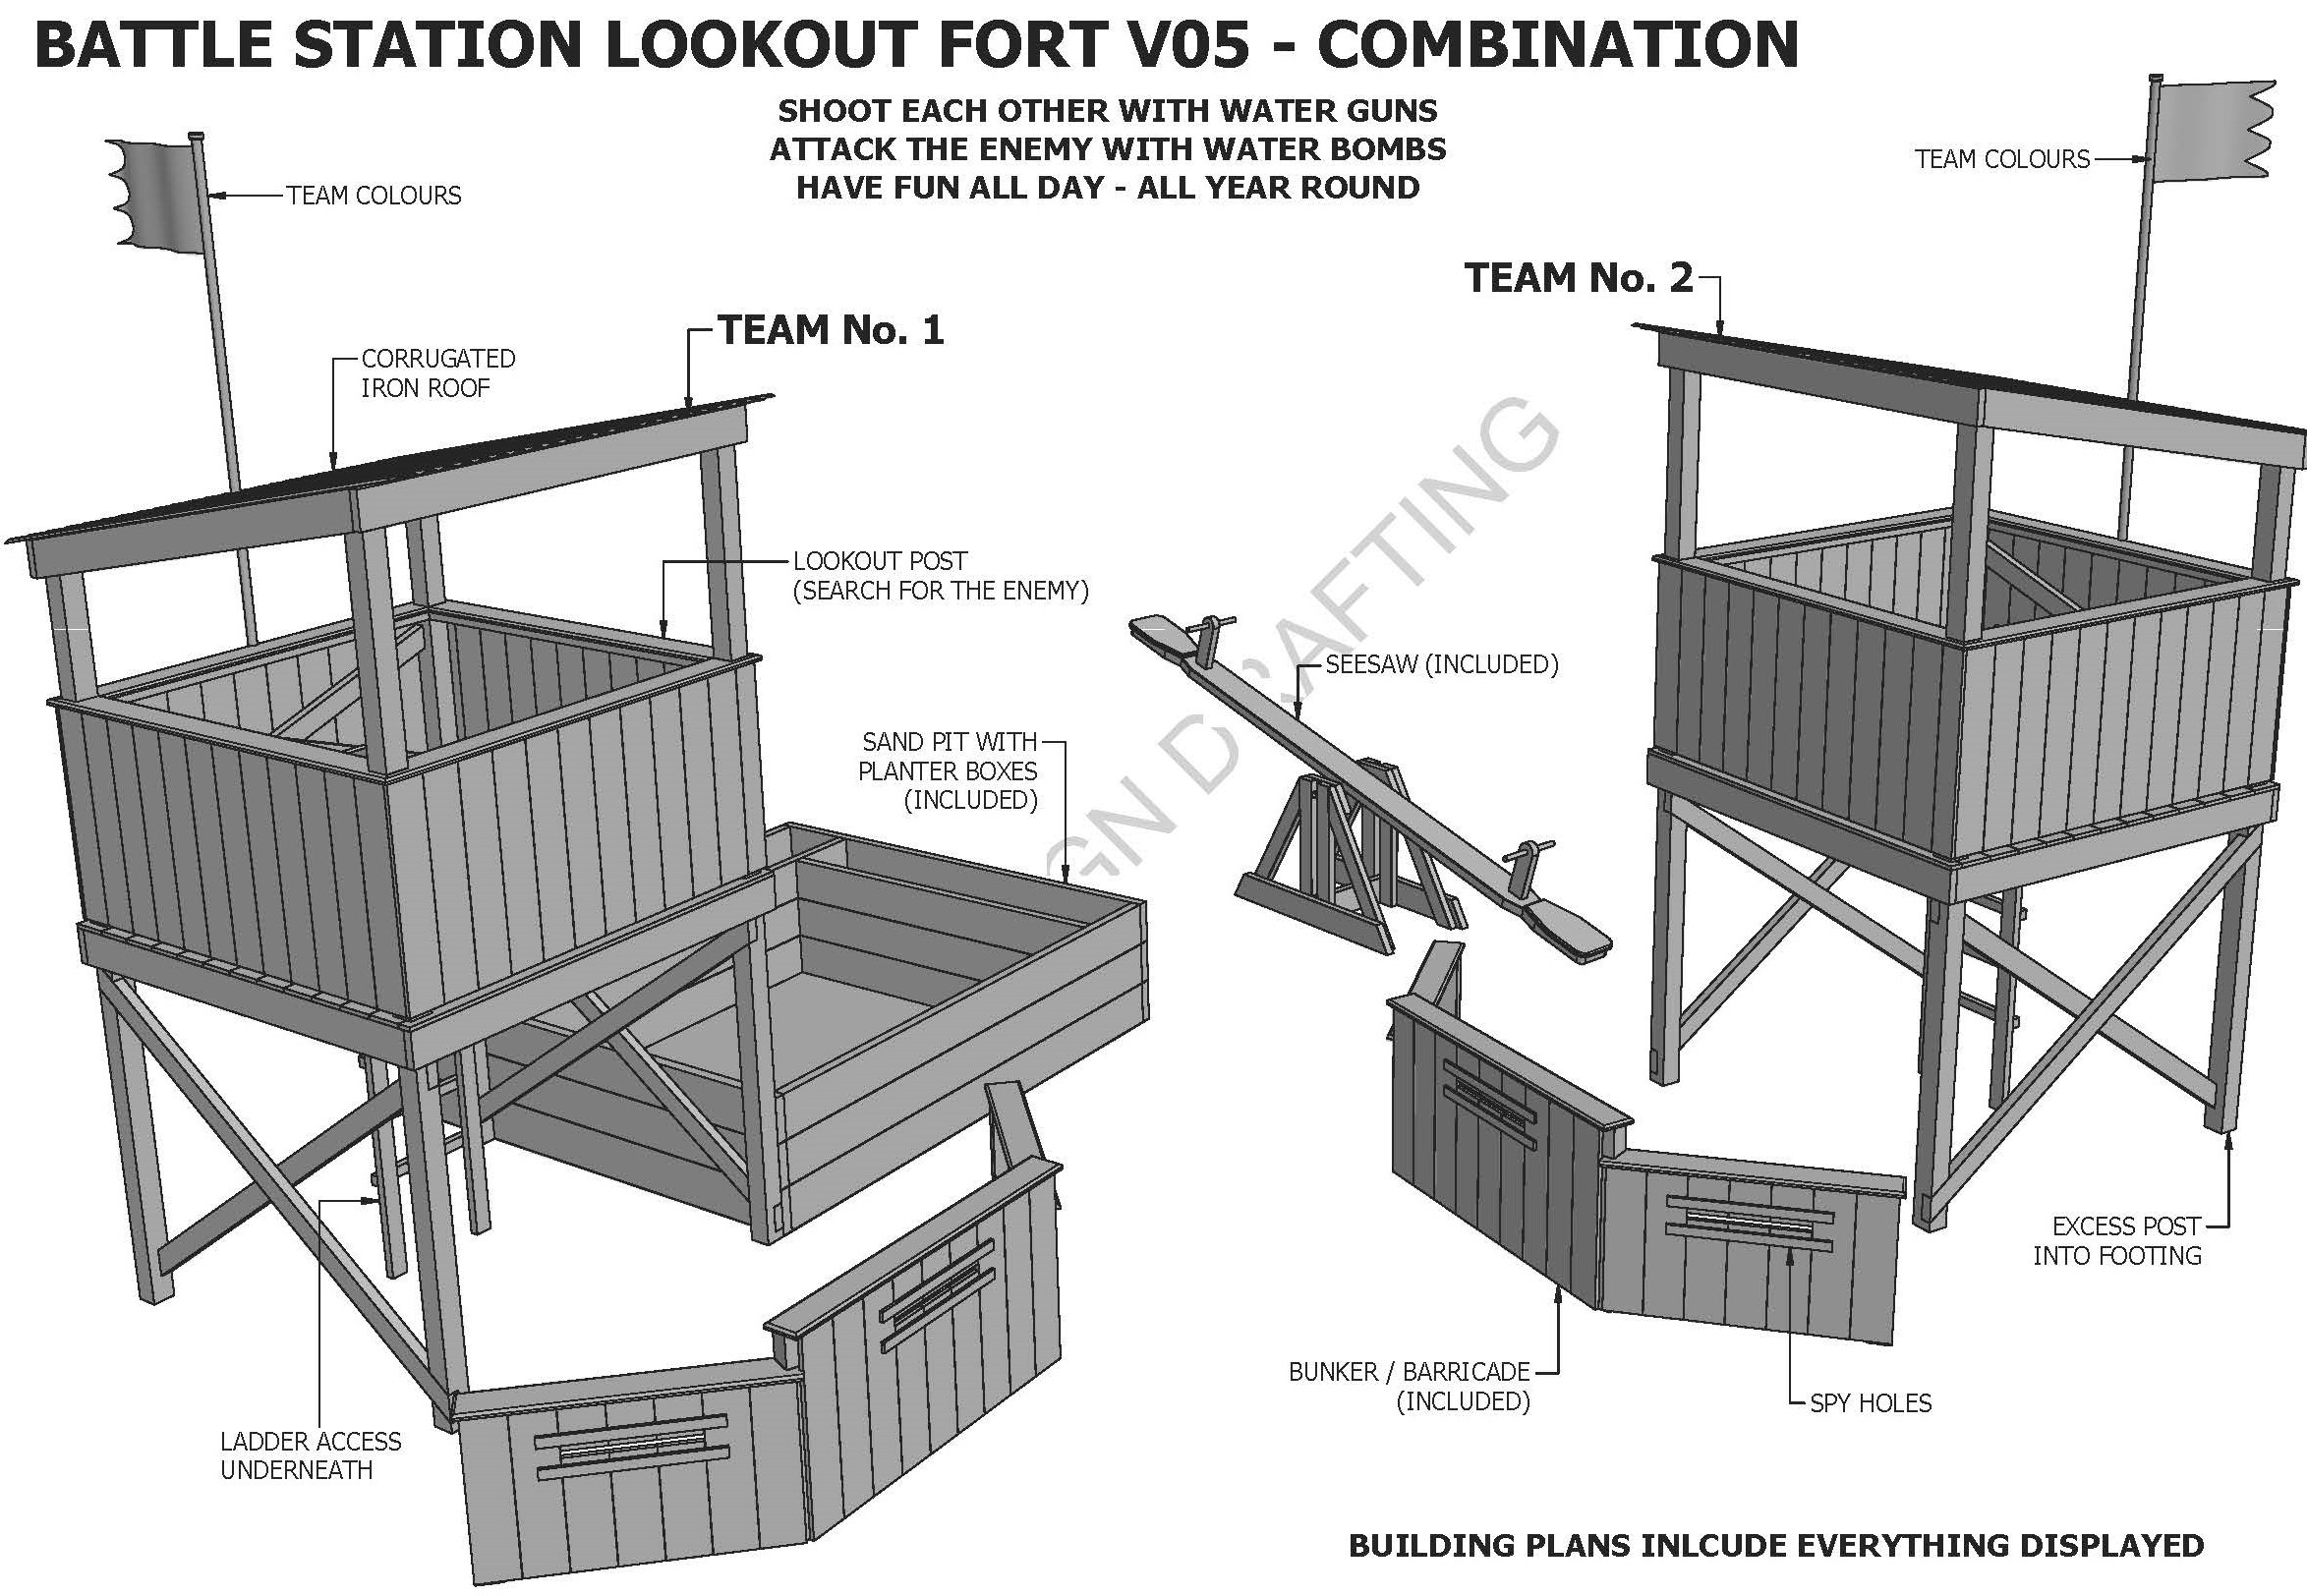 COMBAT CUBBY V05 COMBO 1 With Bunker Barricade, Trap Door Entry, Sand Pit and Seesaw